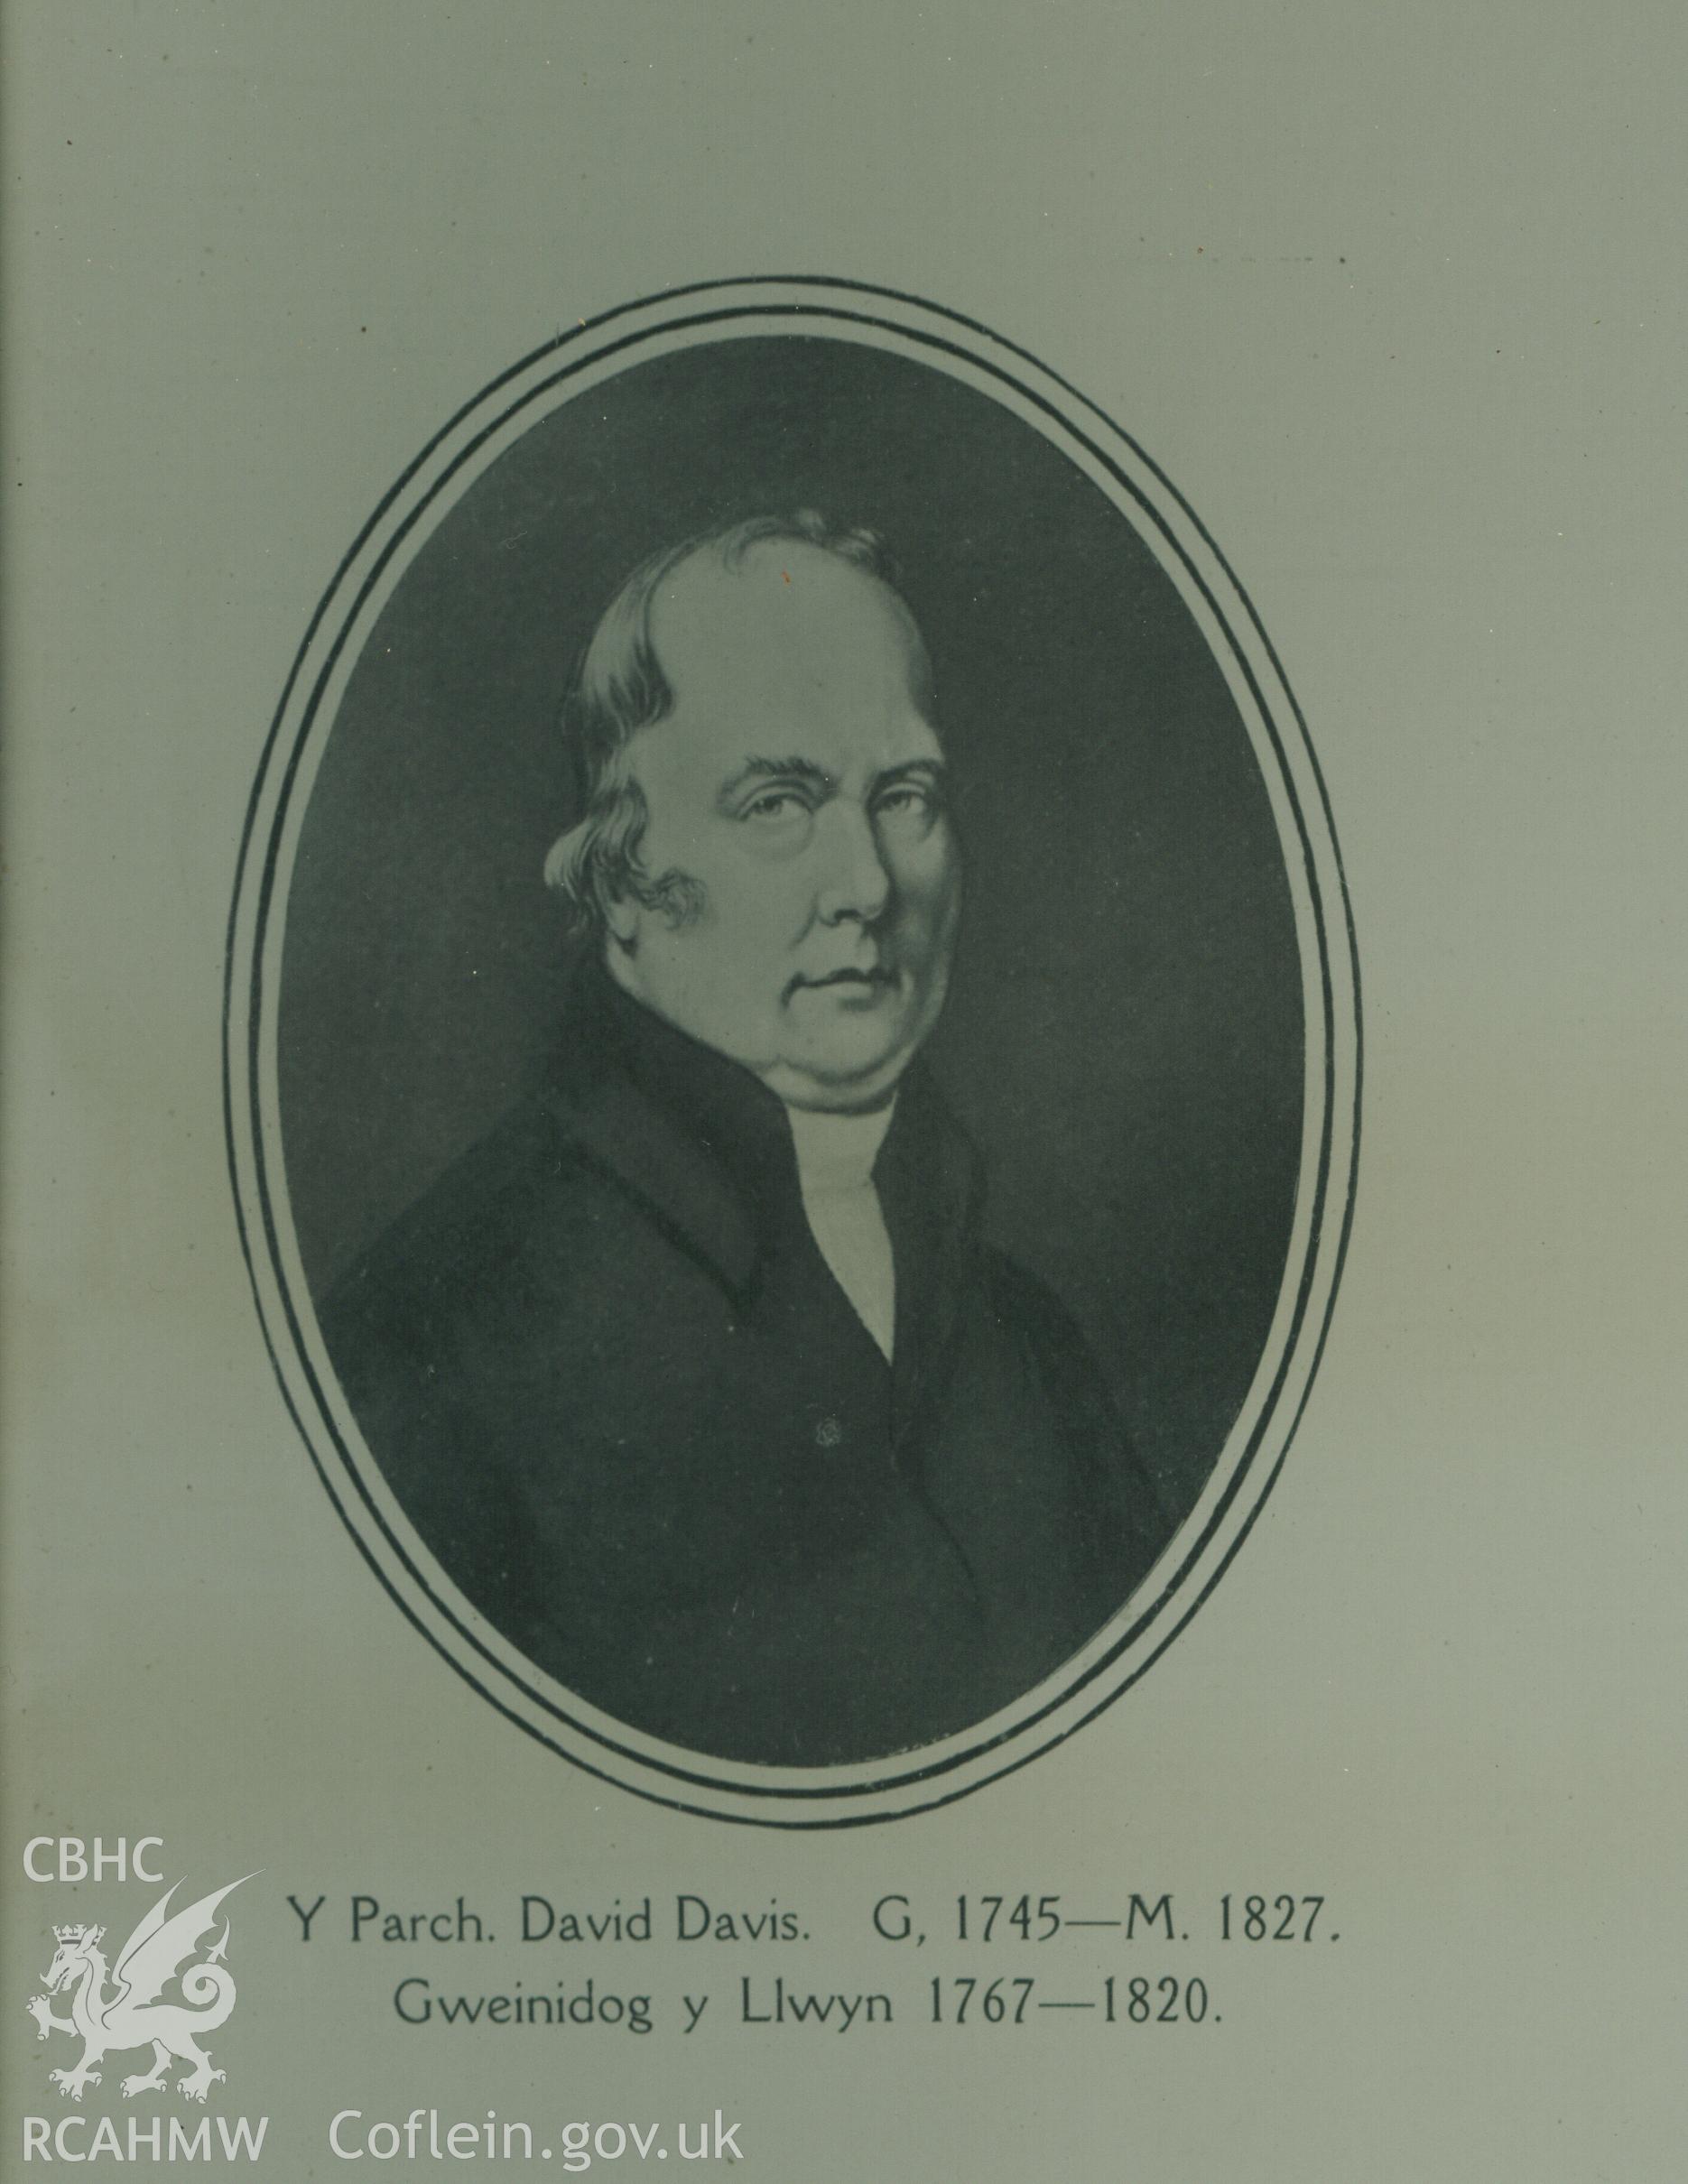 Black and white portrait of the Rev. David Davis, (b.1745, d. 1827). Minister of Llwyn chapel between 1767 and 1820. Donated to the RCAHMW during the Digital Dissent Project.